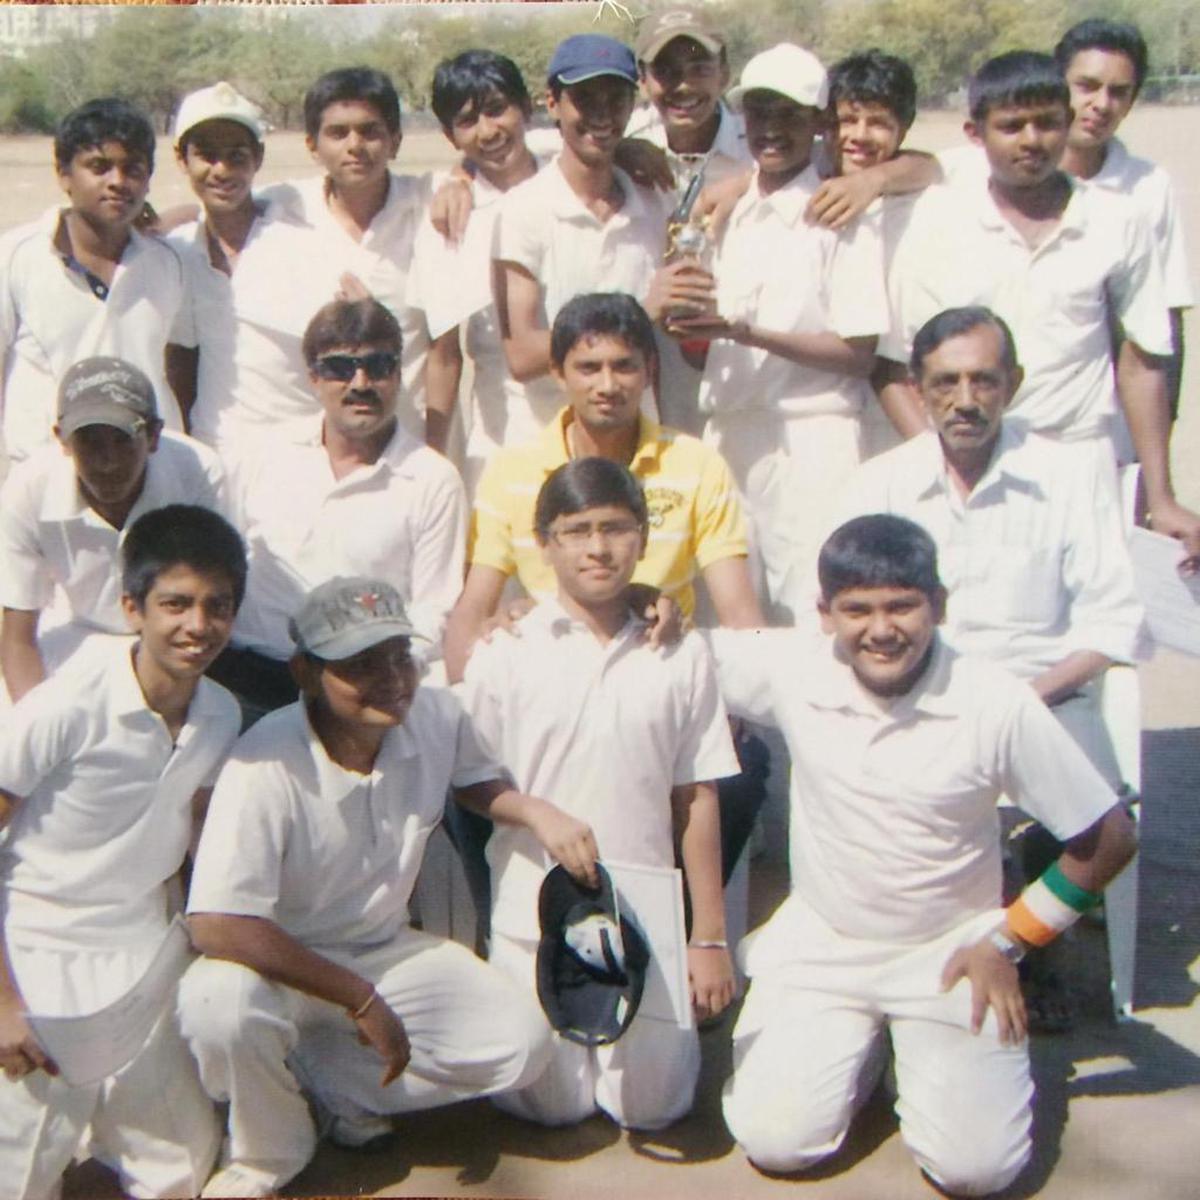 (2nd row, extreme left) A young Jasprit Bumrah also received guidance from former Rajasthan Royals pacer Siddharth Trivedi (in yellow).